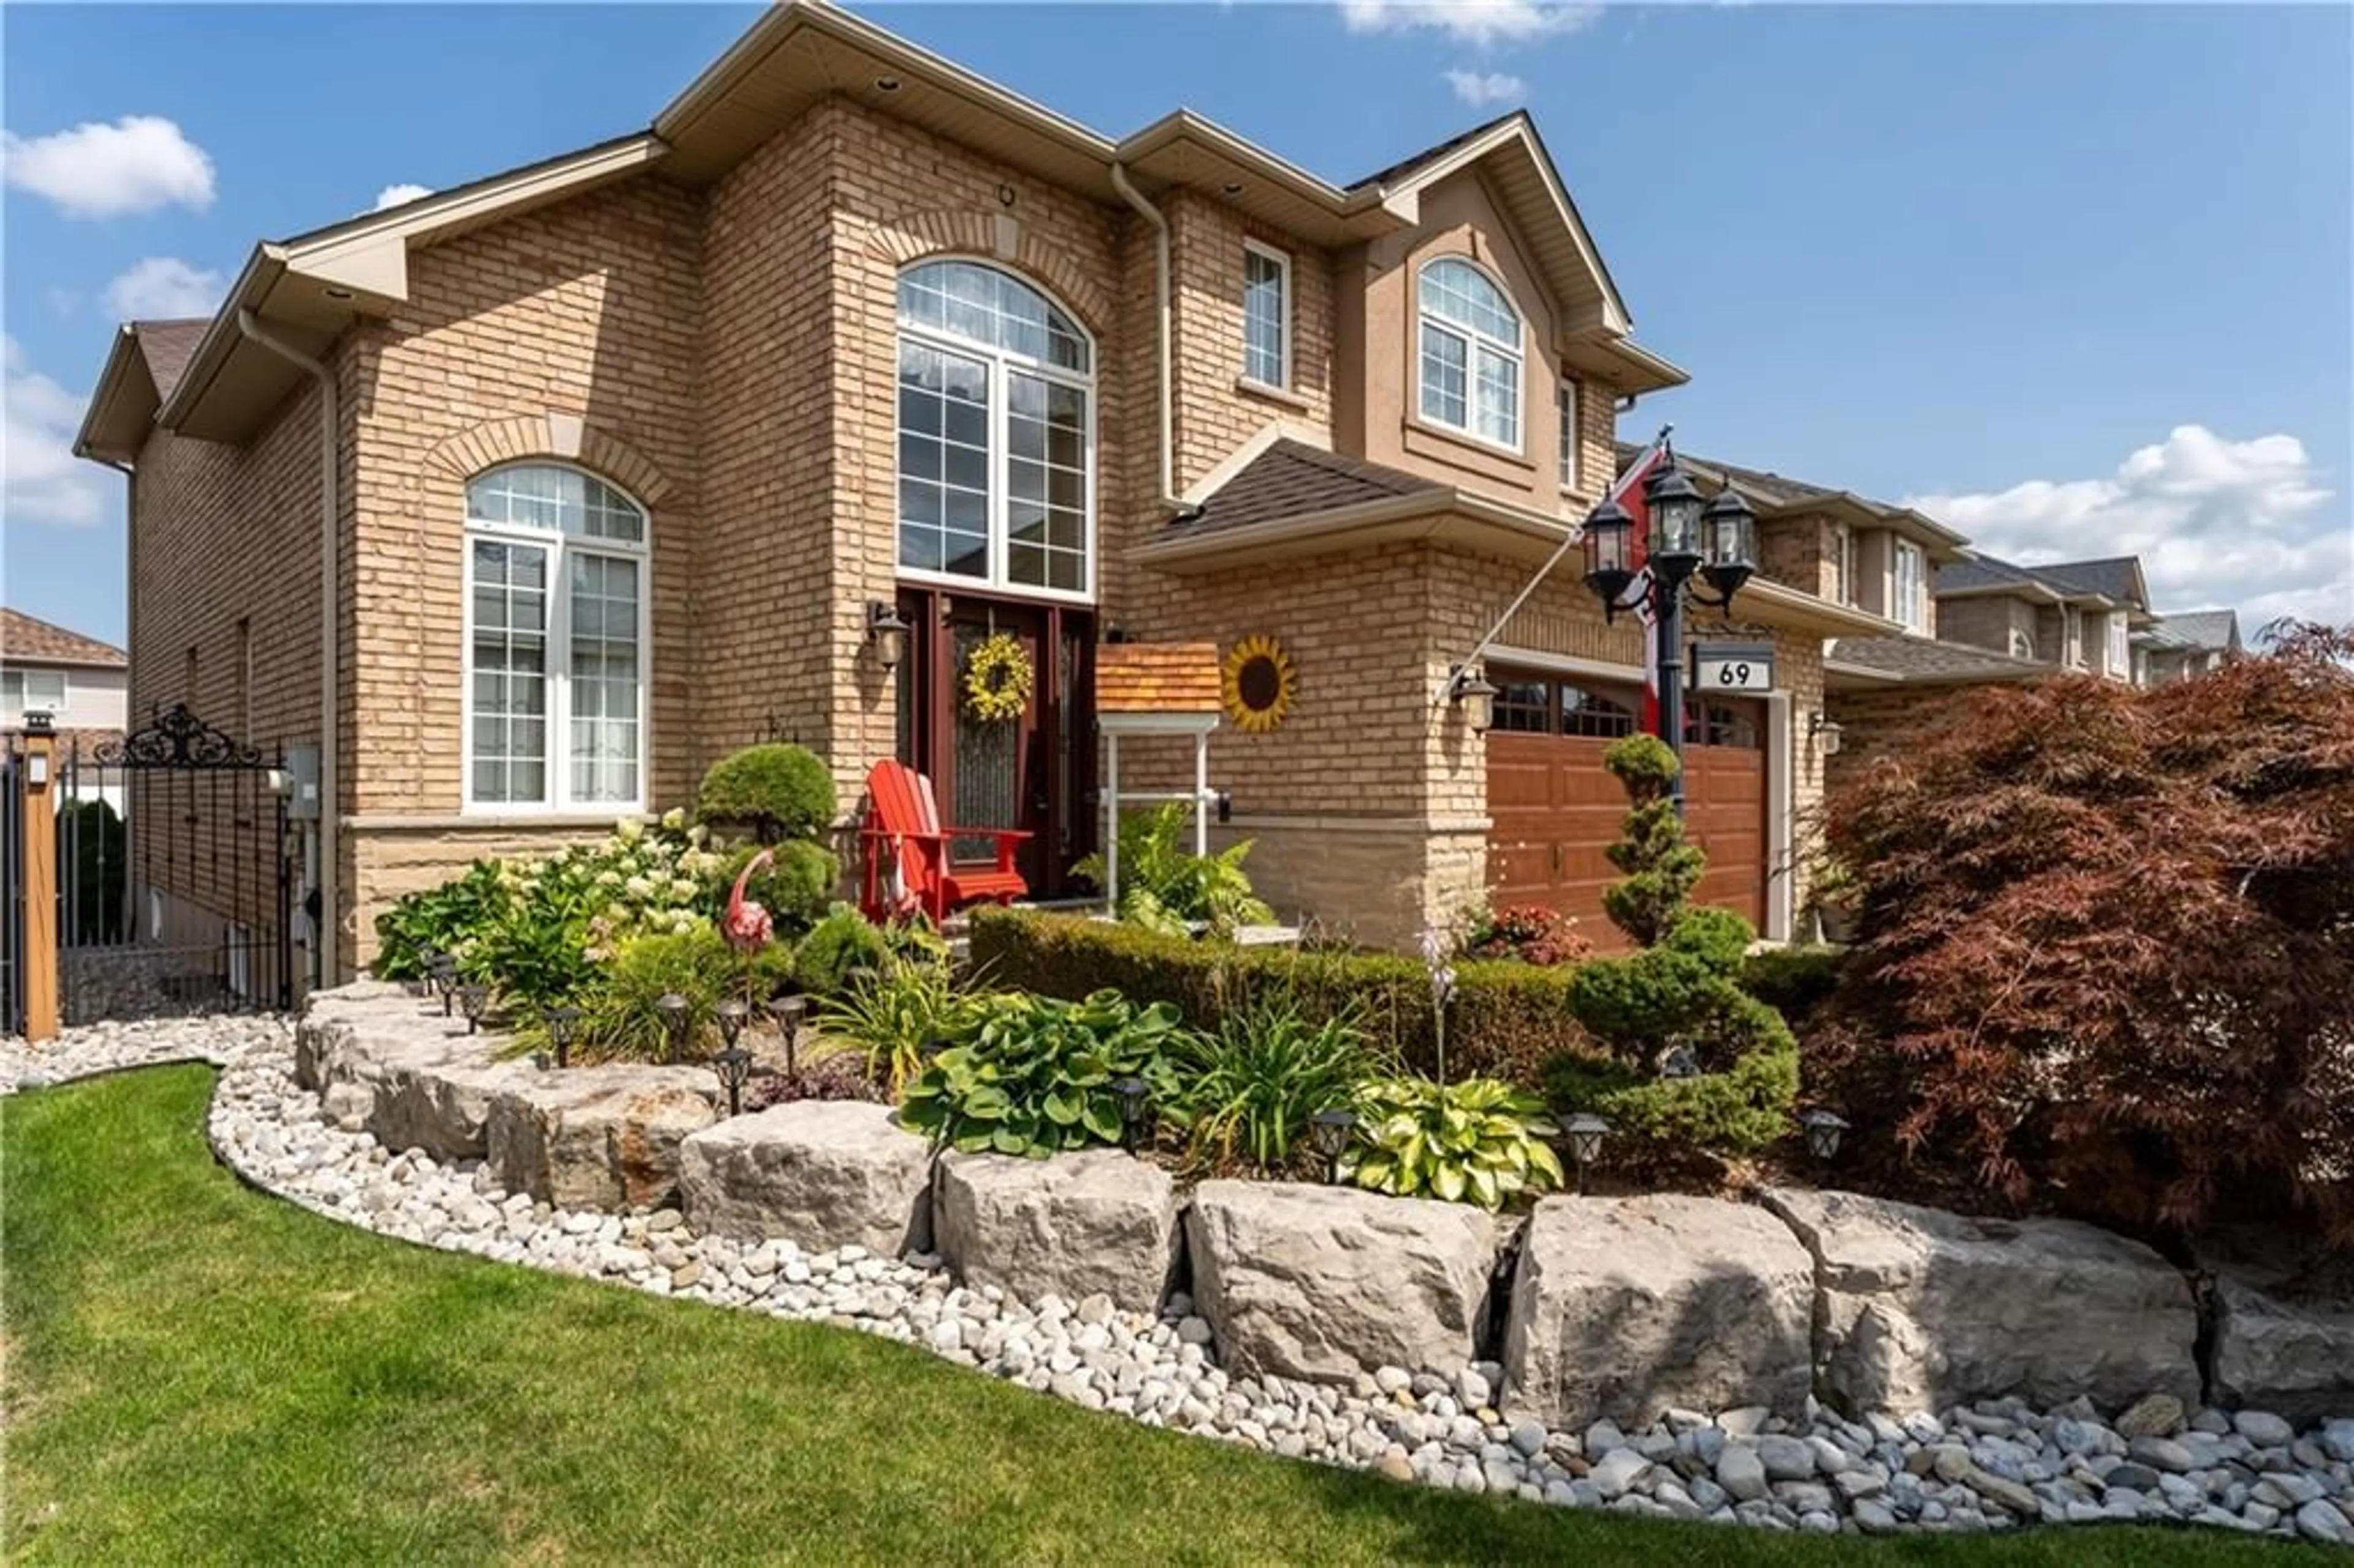 Home with brick exterior material for 69 Hillcroft Dr, Stoney Creek Ontario L8J 3W9